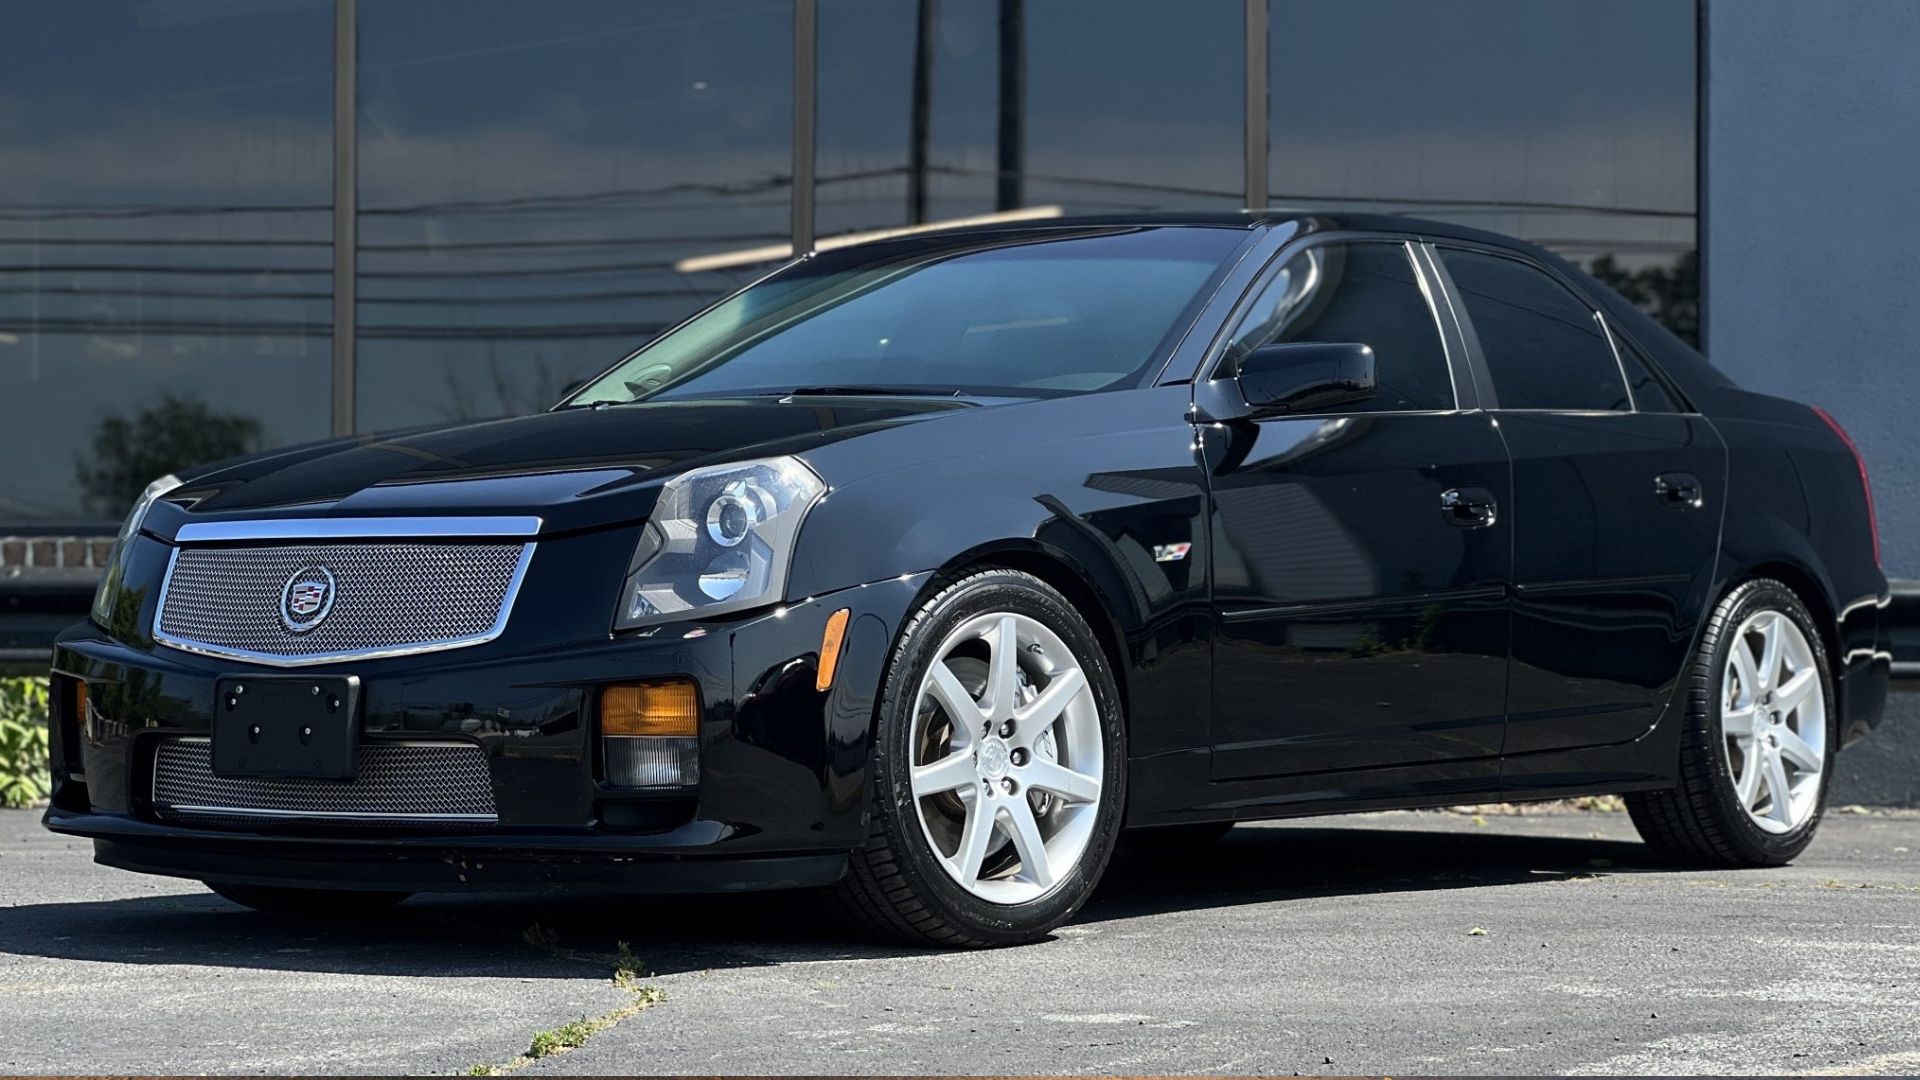 2004 Cadillac CTS-V in black posing in front of office building